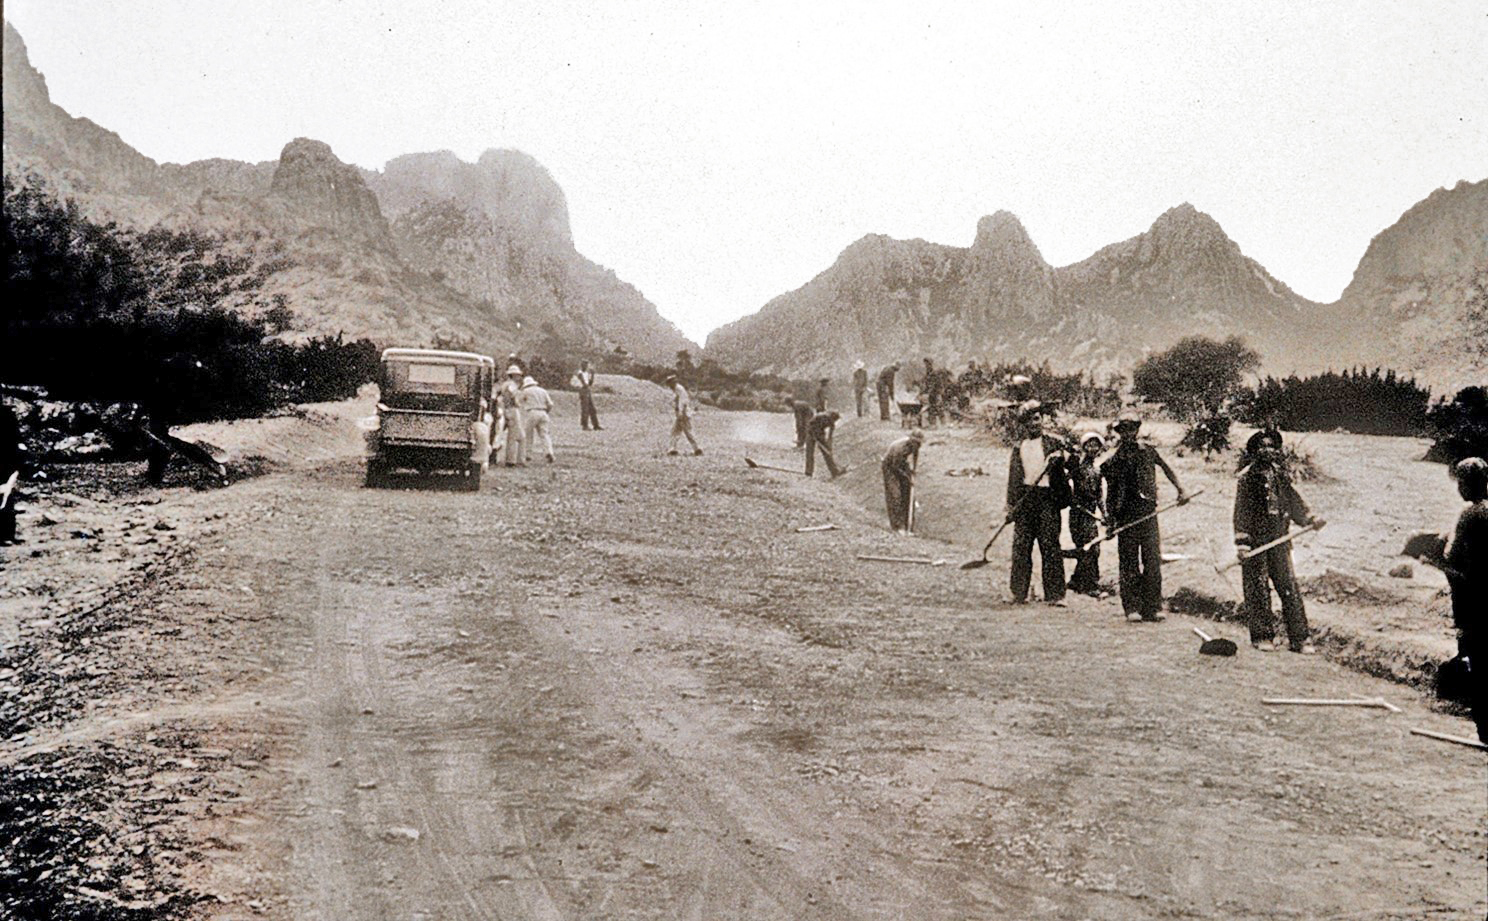 Civilian Conservation Corps work crew constructing the road